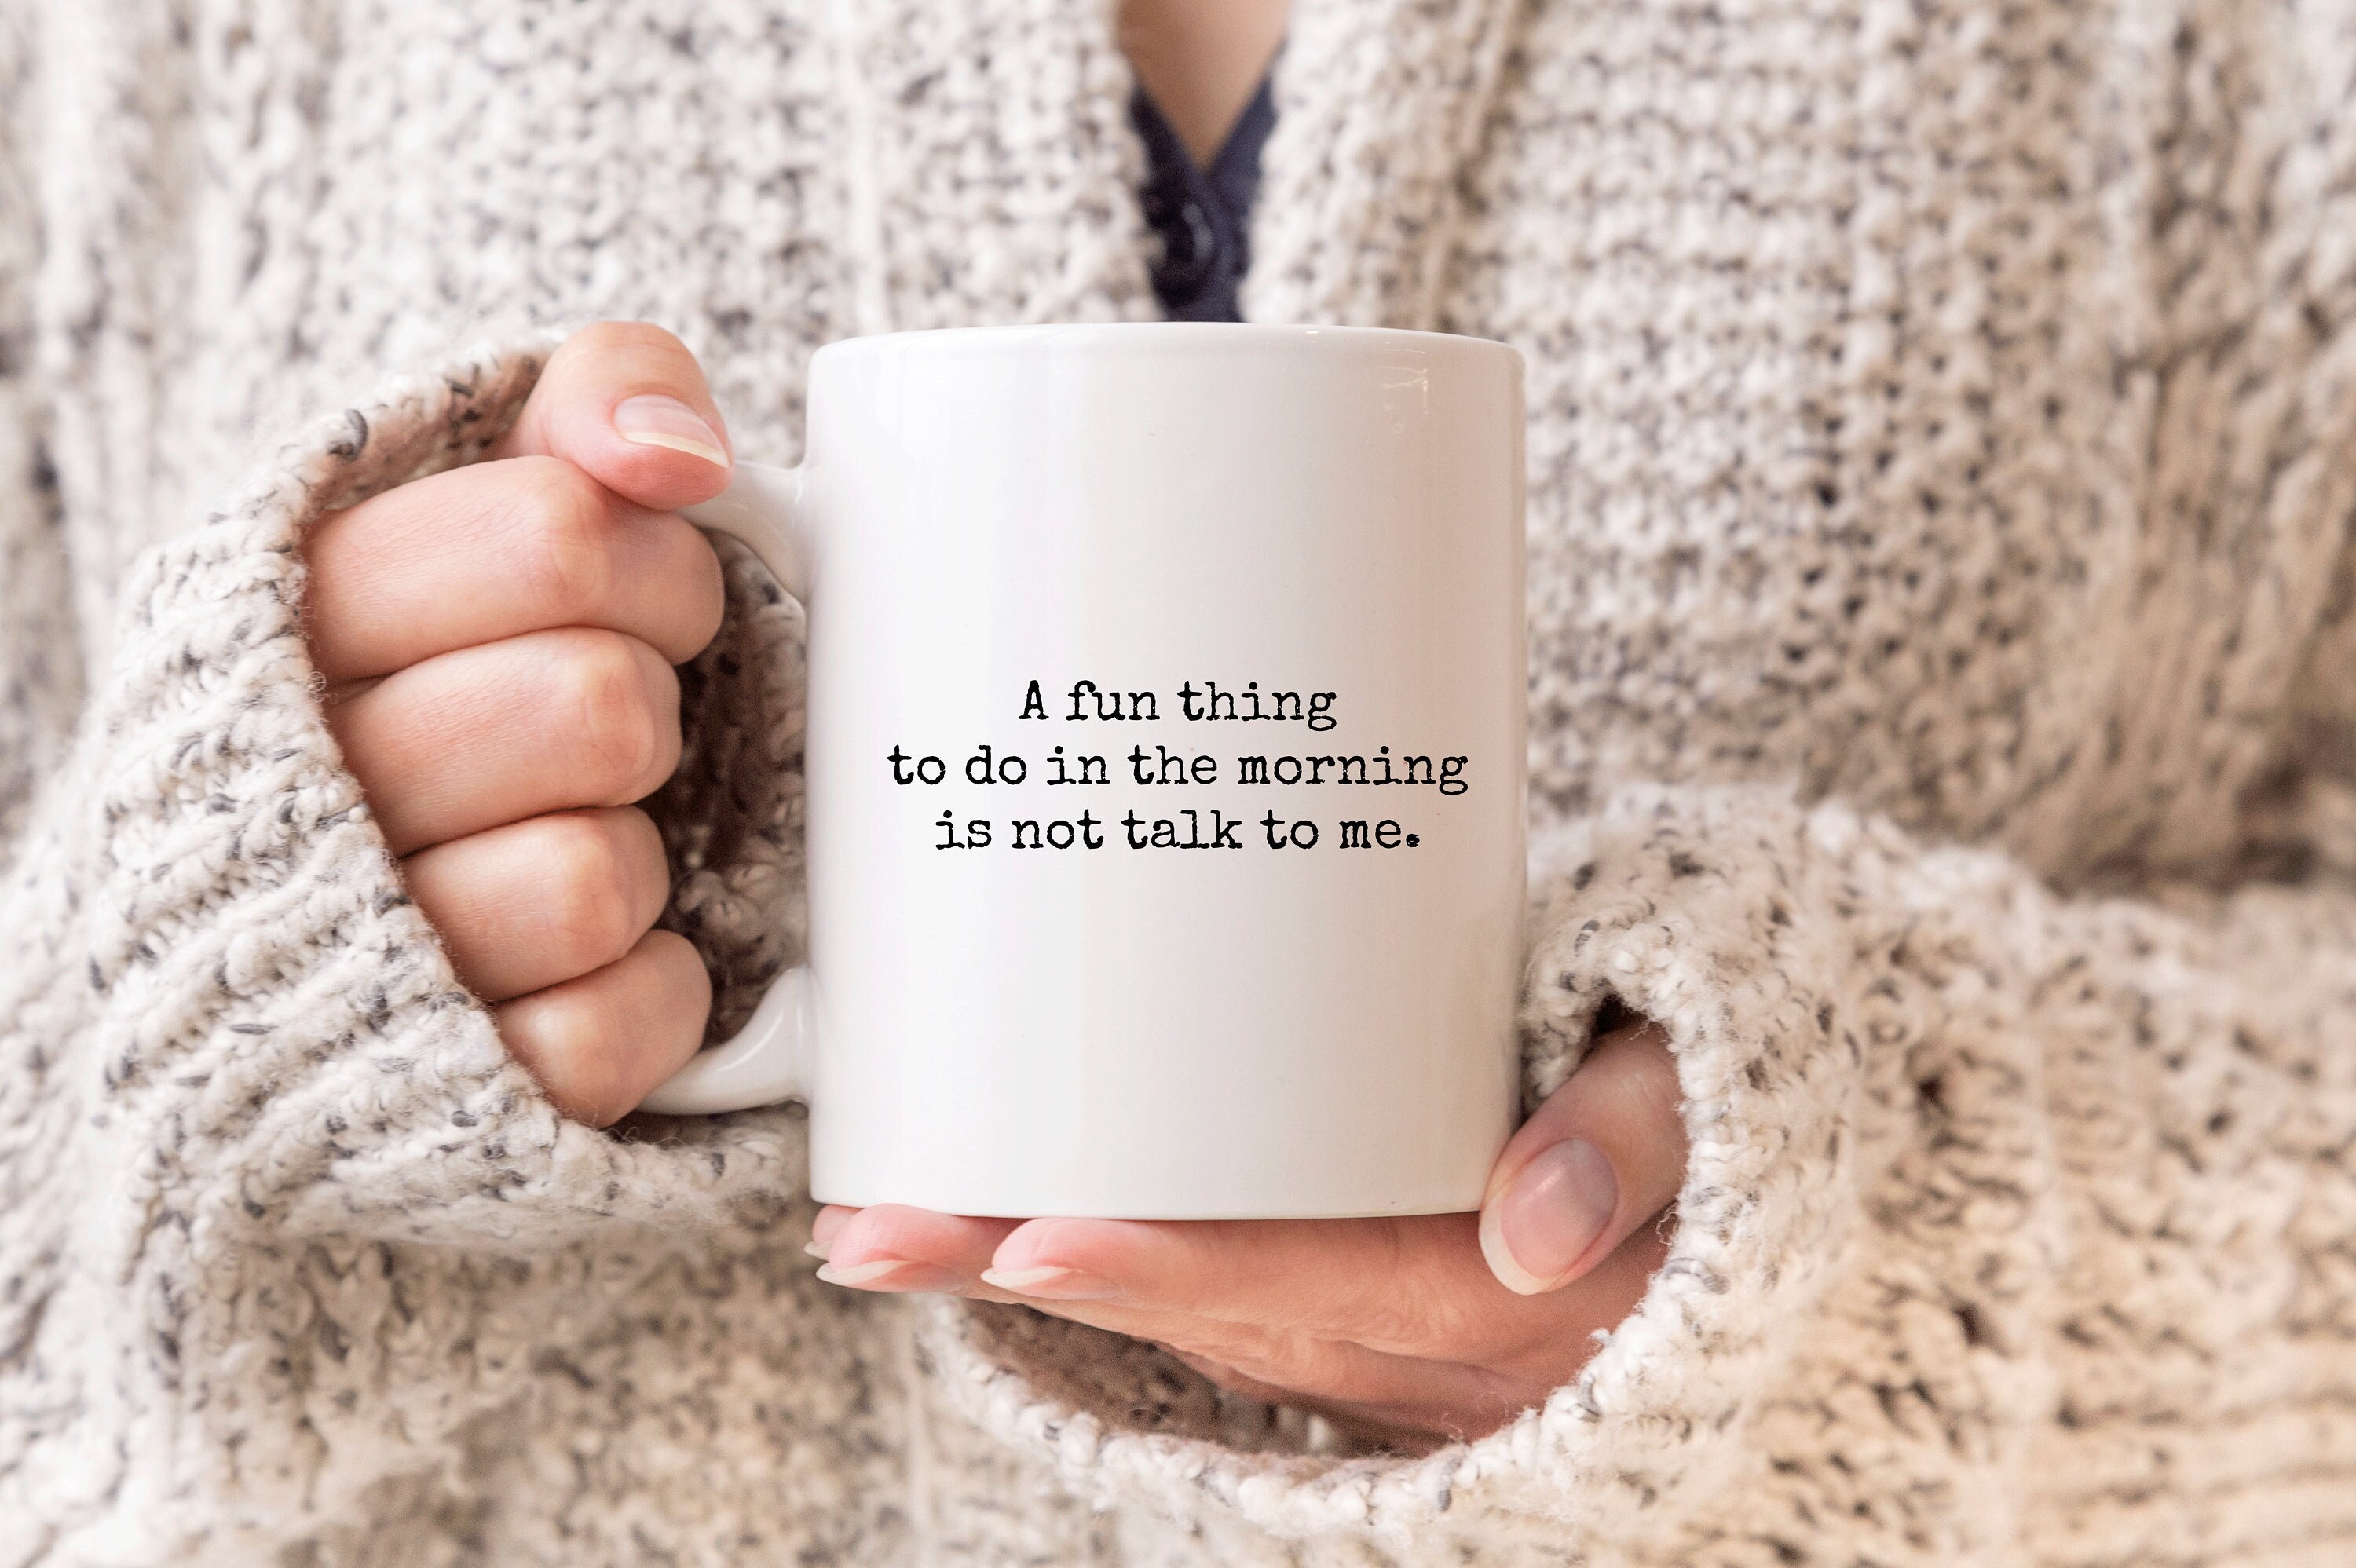 Not Today - Funny Coffee Mug - Talking Out Of Turn